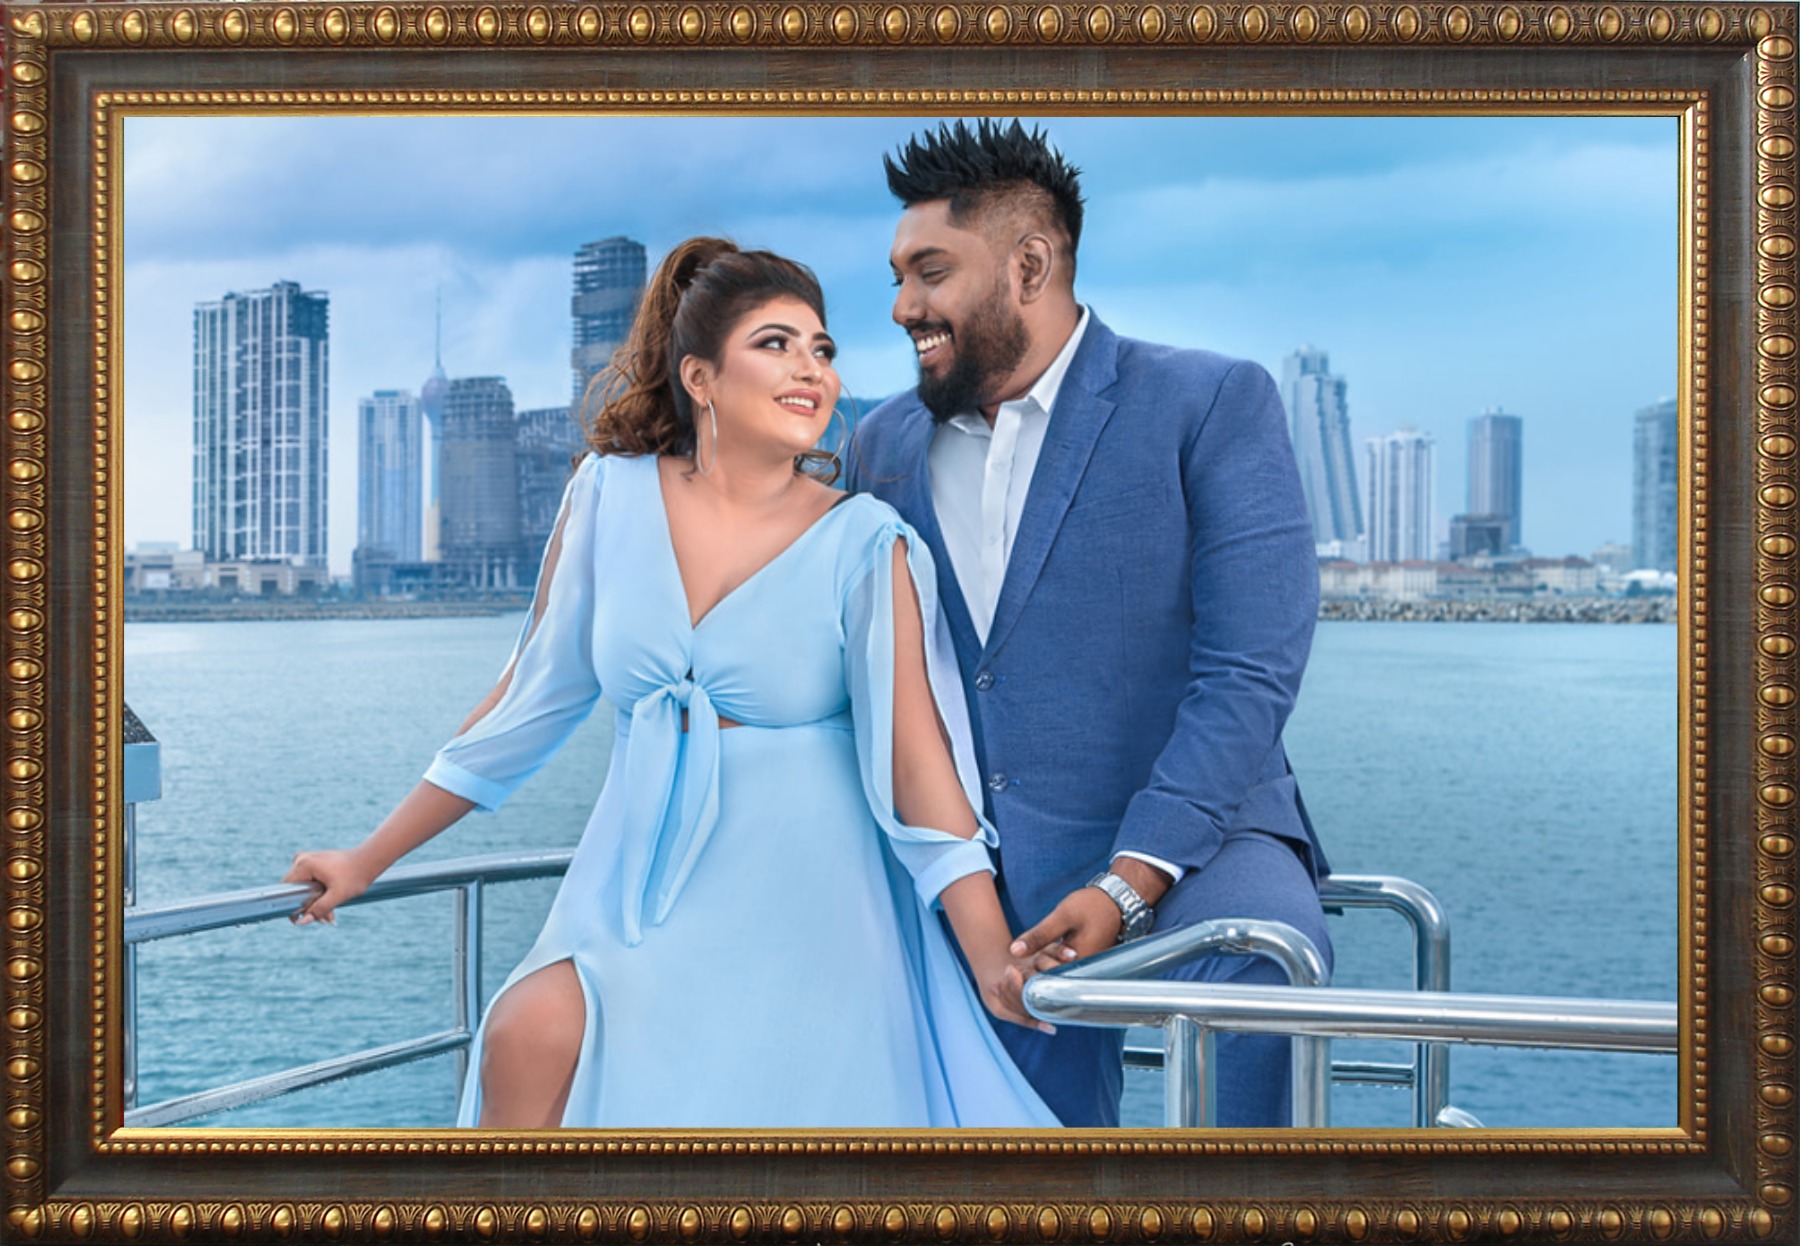 You are currently viewing “Voluptuous Lankan ‘Love Birds’ shoot at Port City Bay Locations”